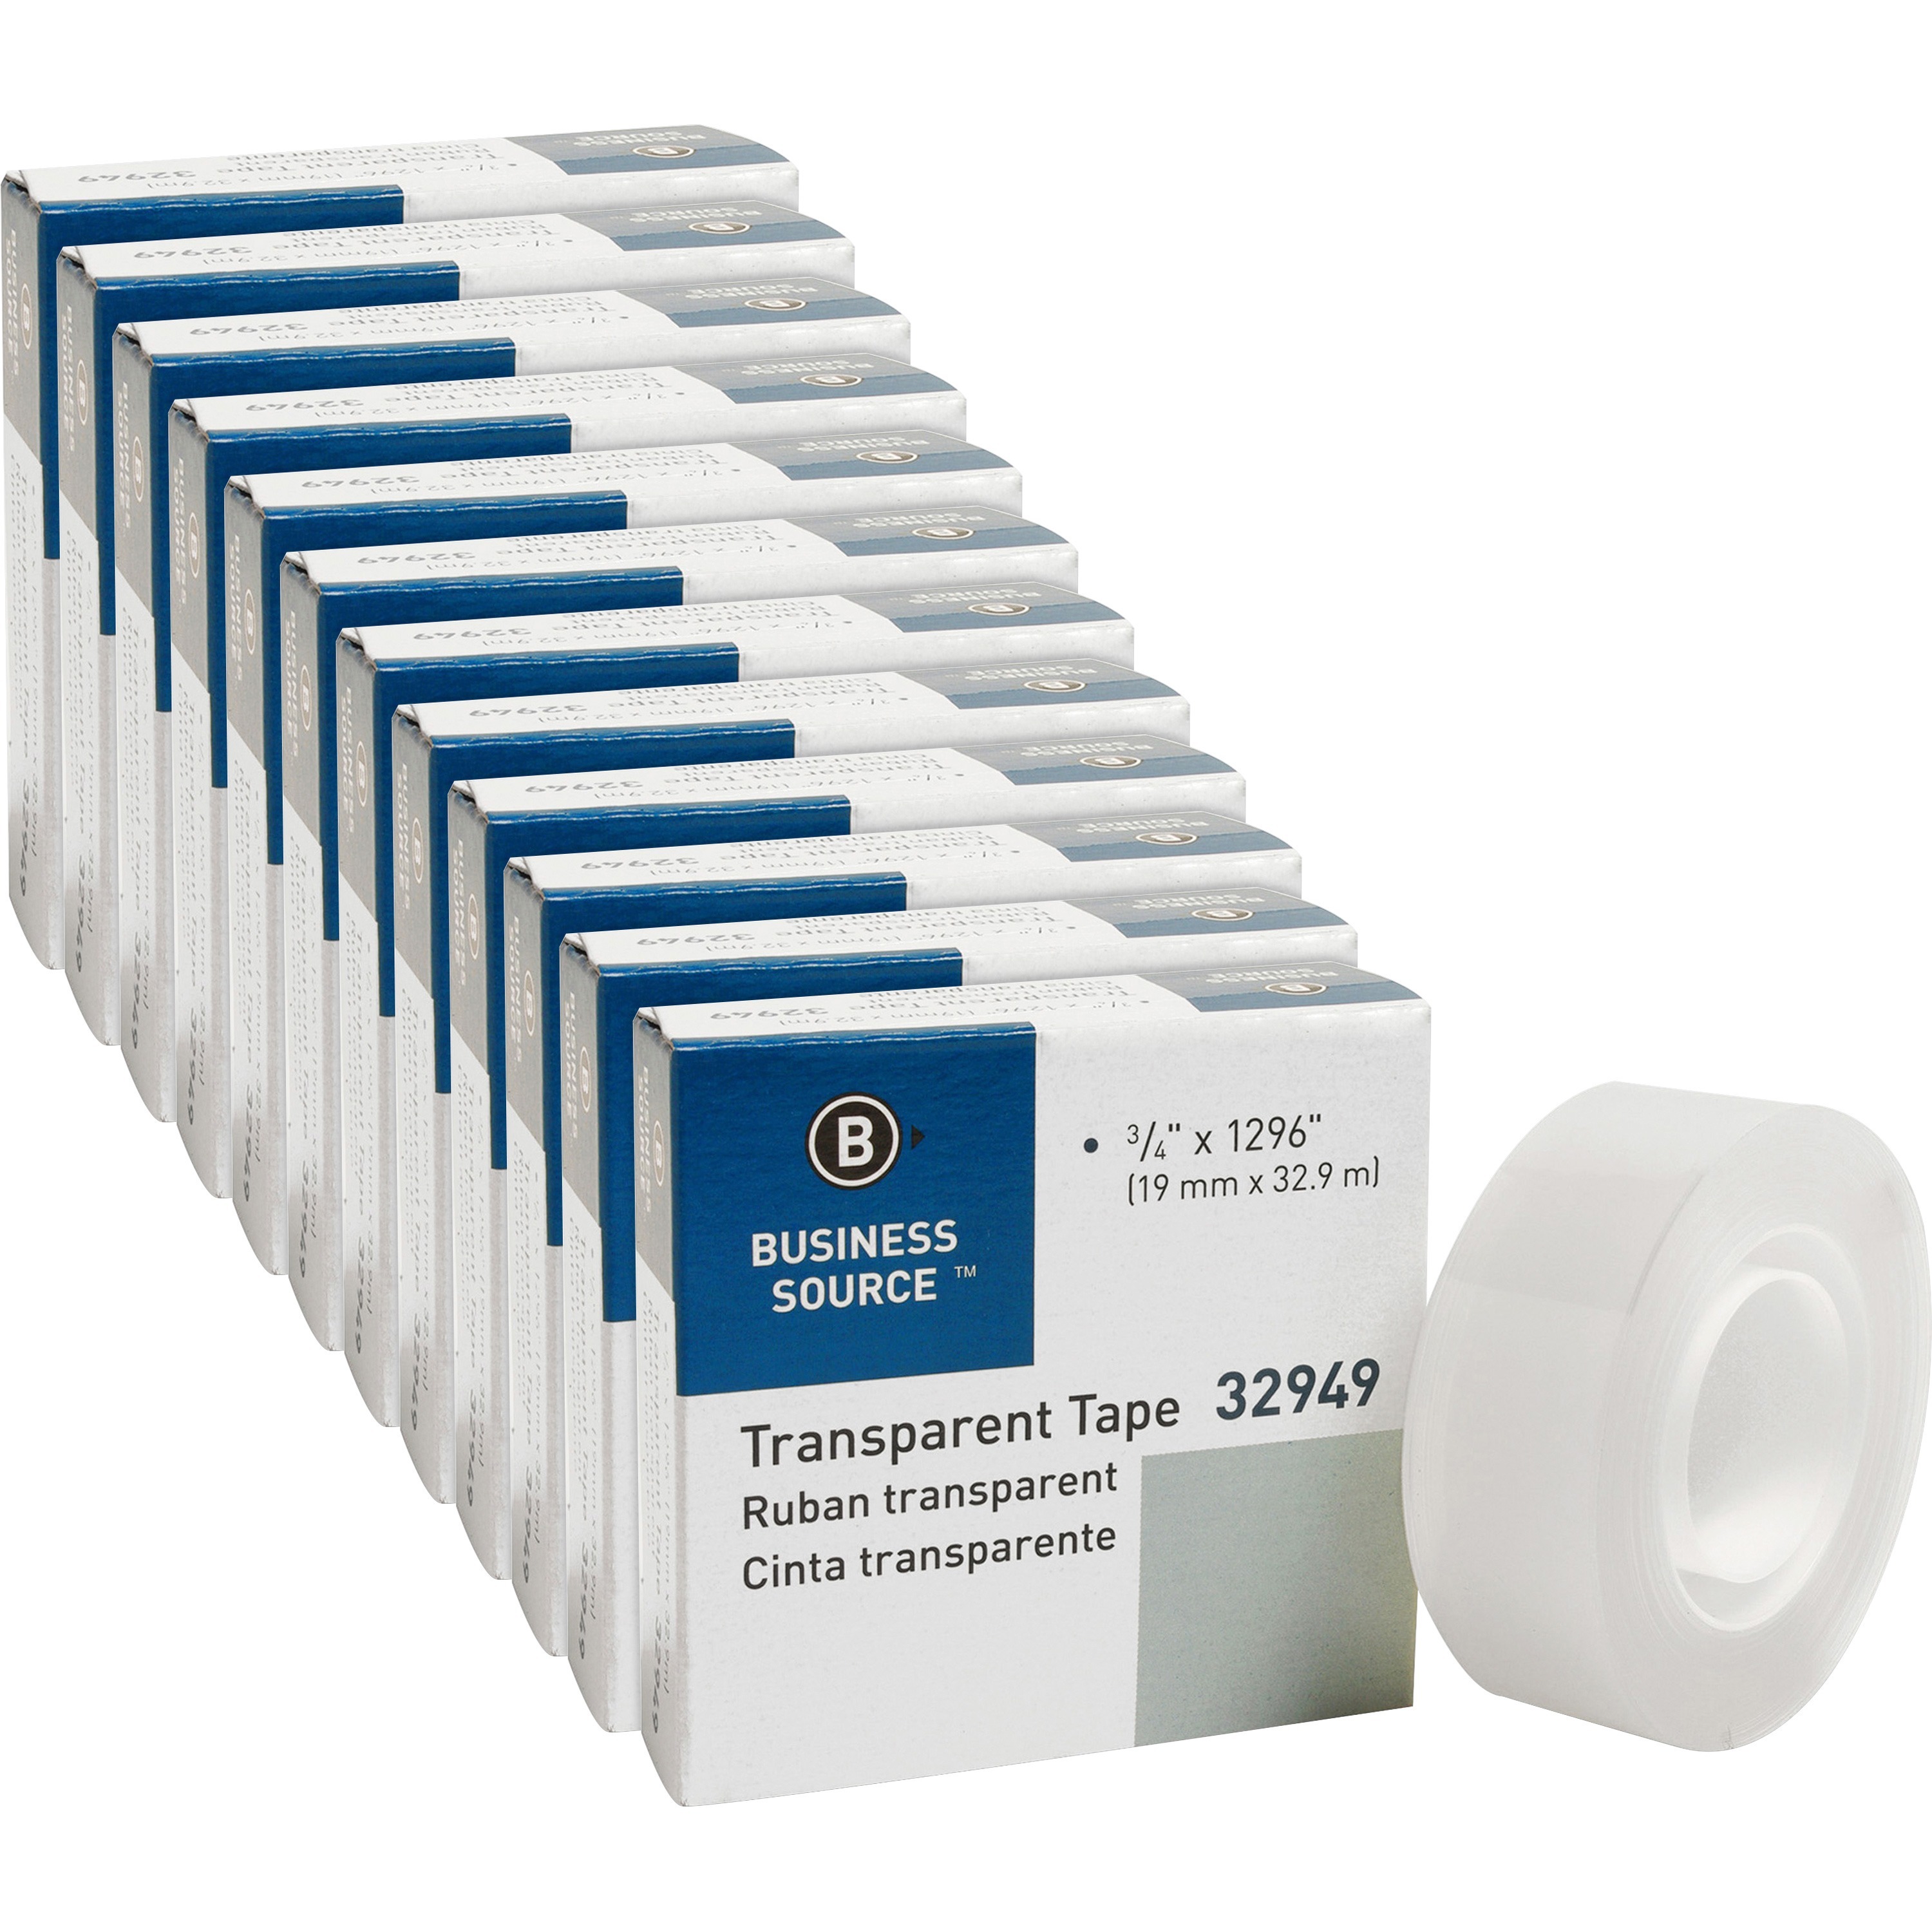 Business Source Invisible Tape, Value pk, 1 Core, 3/4x1000, 12/pk, Clear - Bsn32953